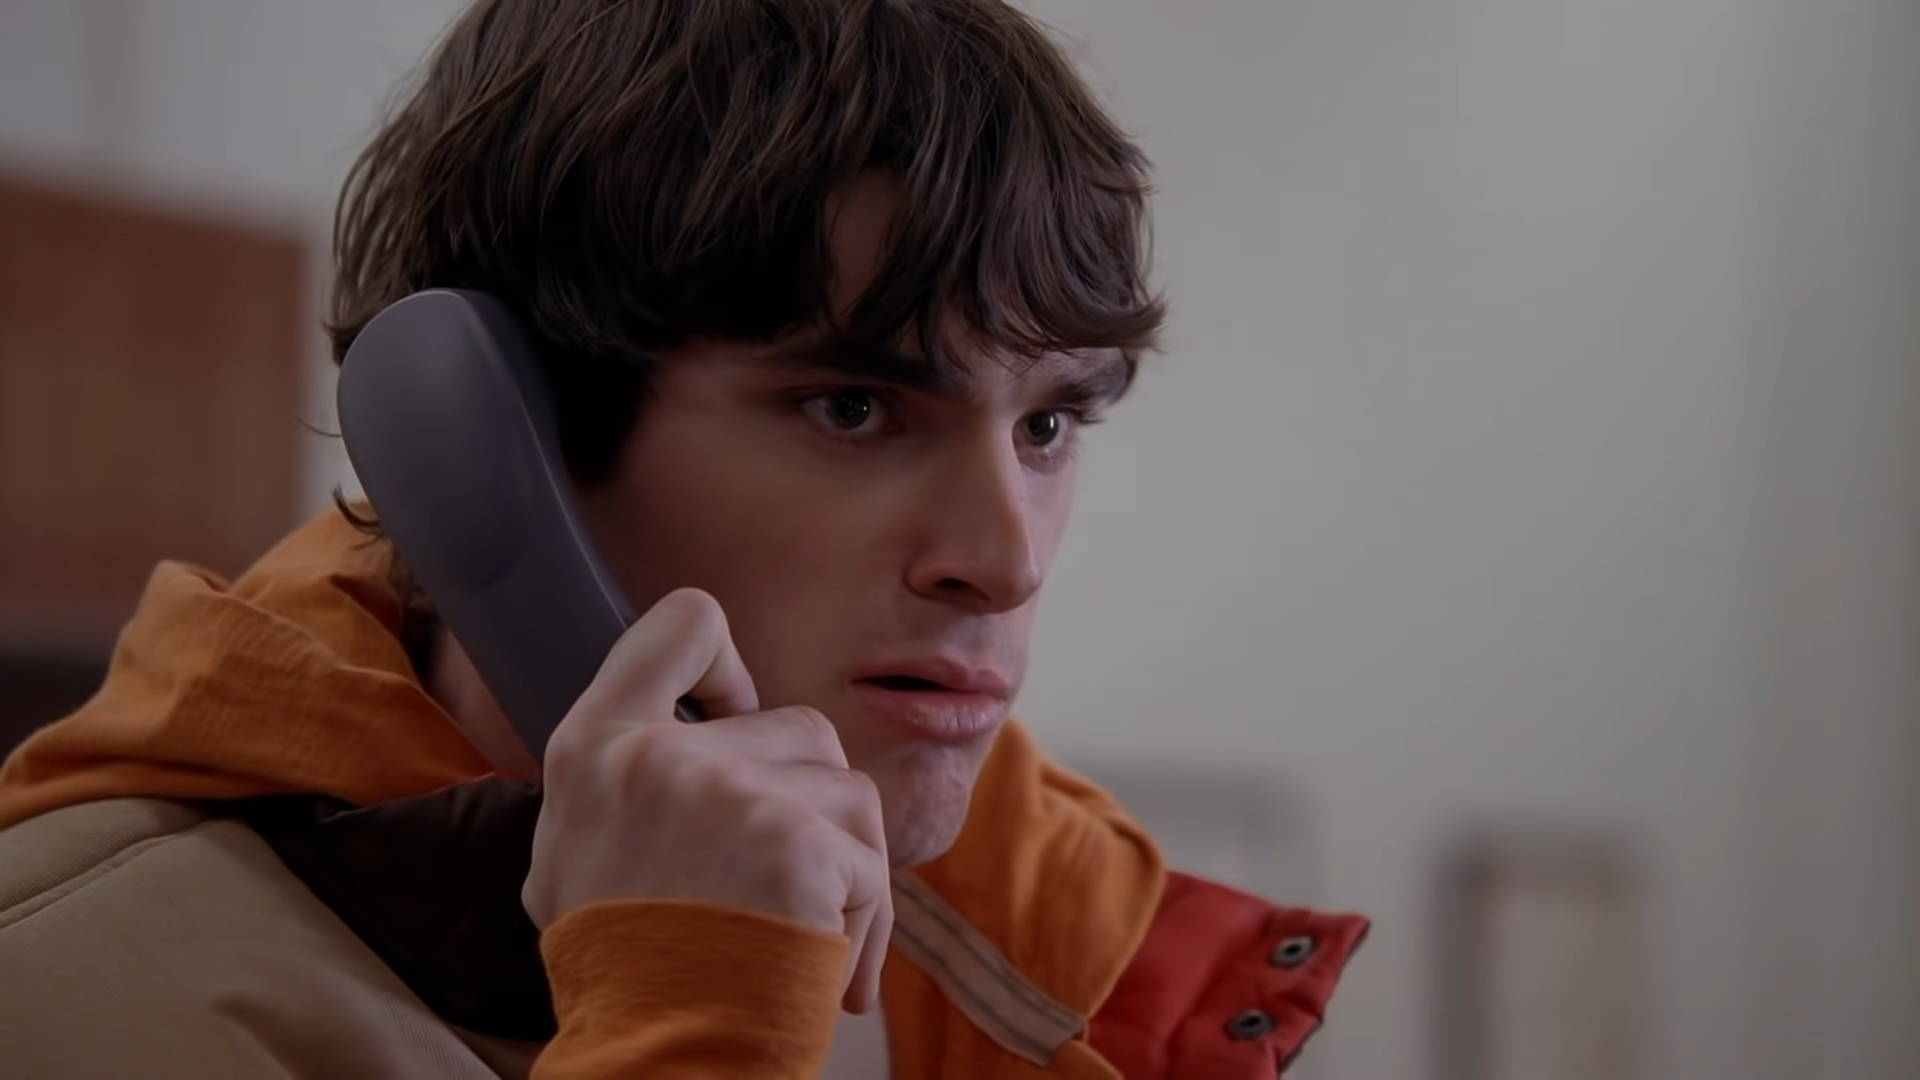 Breaking Bad Creator Vince Gilligan Spills on Why a Walt Jr. Spinoff Isn't in the Cards: A Deep Dive into the Future and Integrity of the Iconic Series